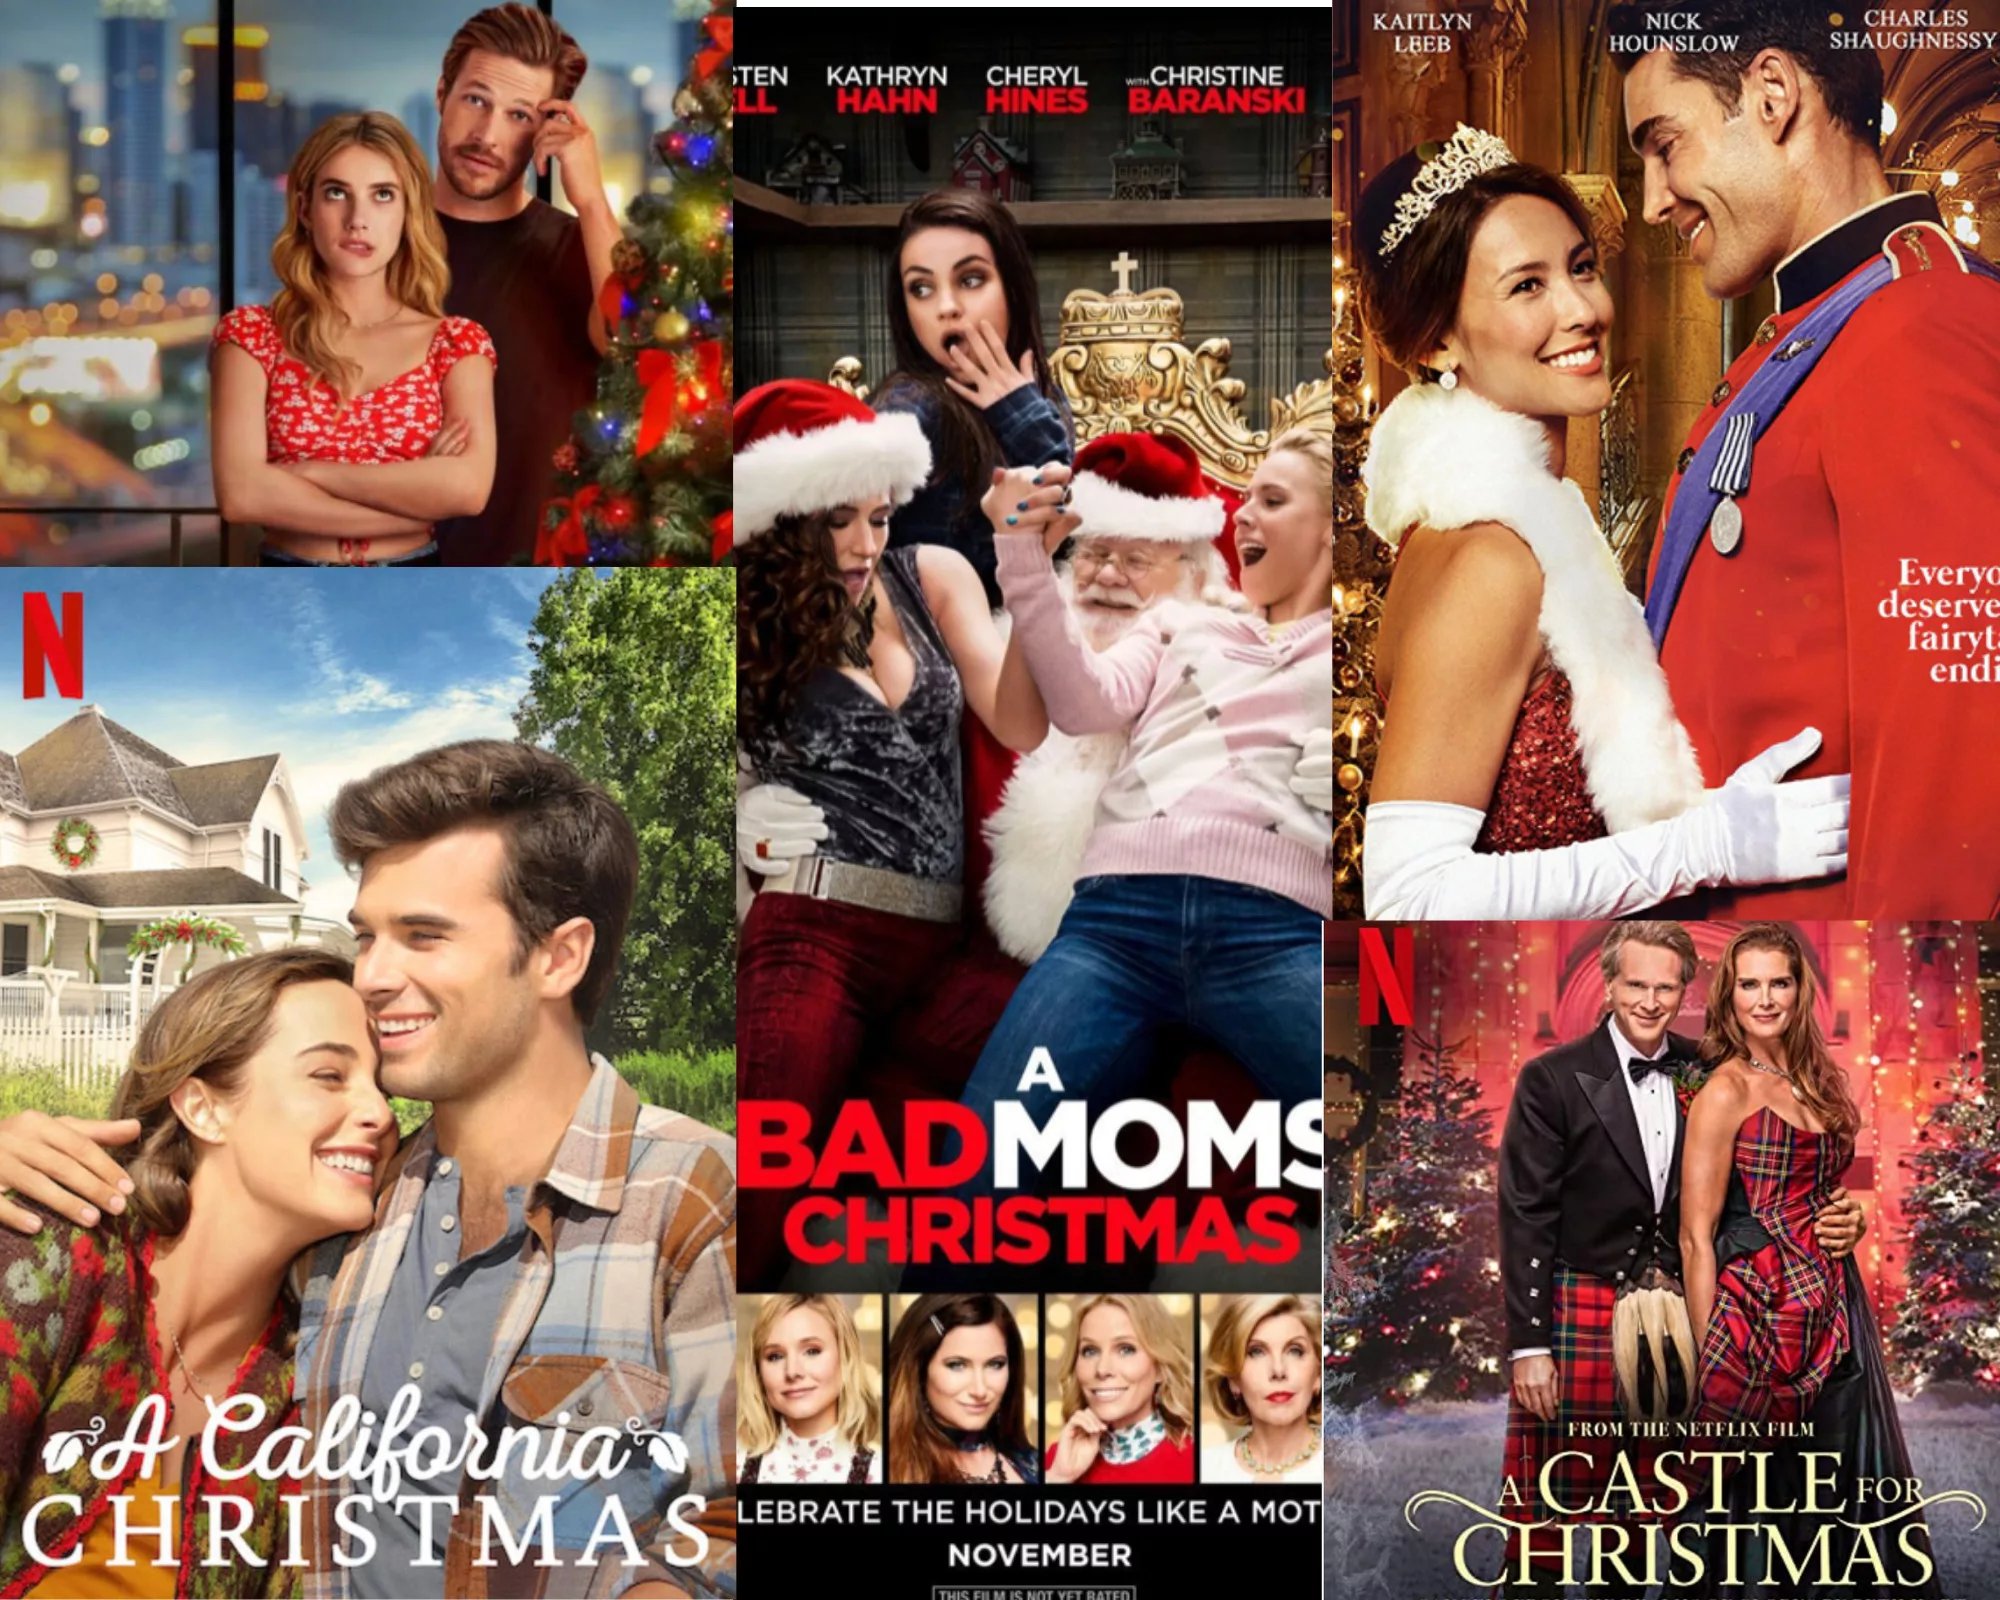 Expectations are Low, but Spirits are High! Top 5 Netflix Christmas Movies